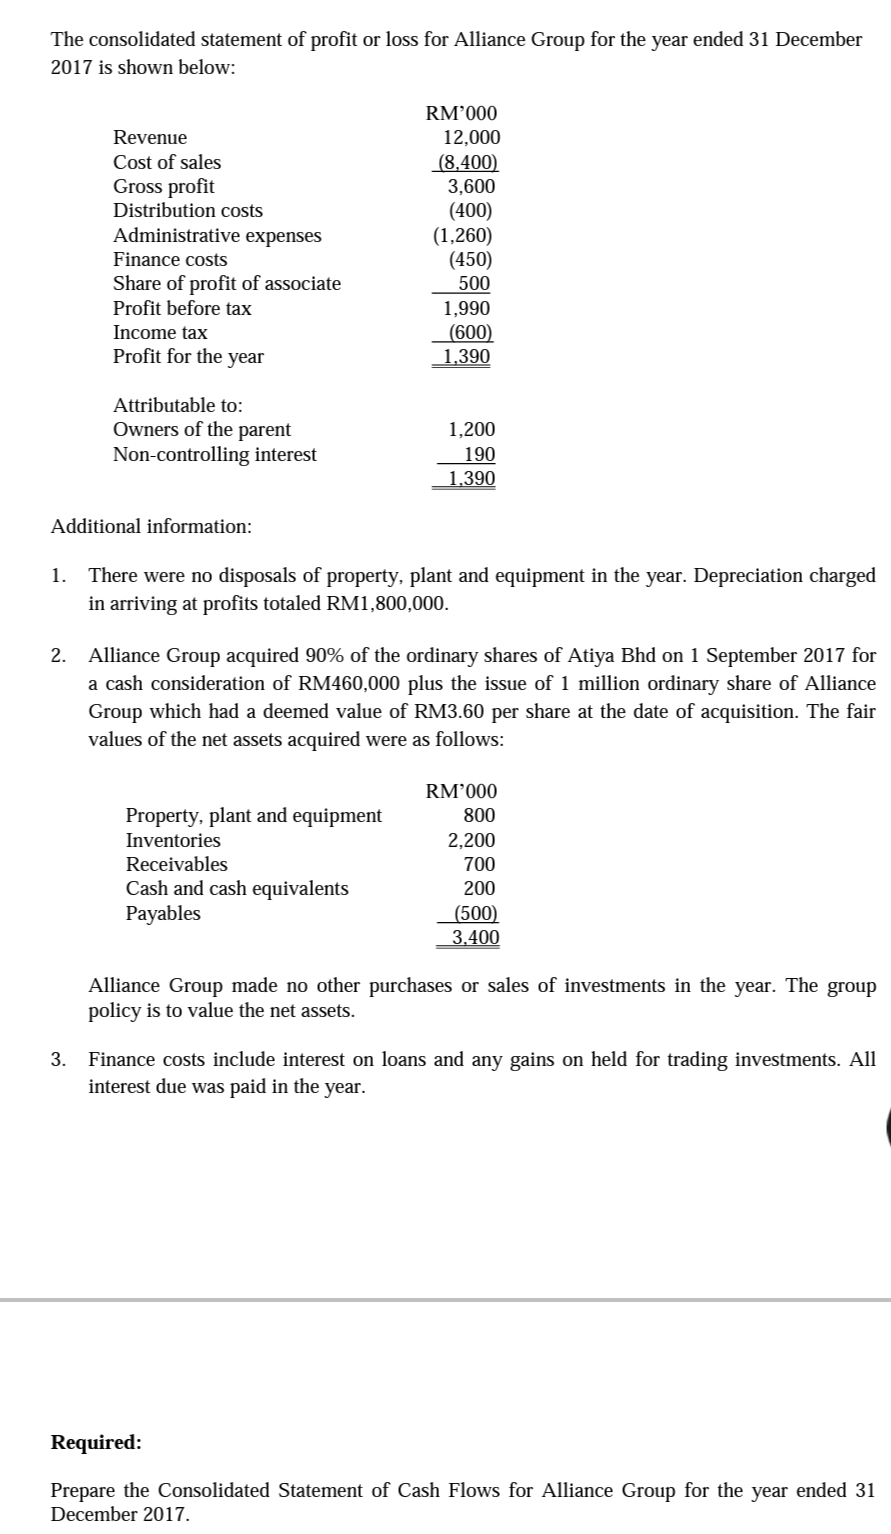 The consolidated statement of profit or loss for Alliance Group for the year ended 31 December
2017 is shown below:
RM'000
12,000
(8,400)
3,600
(400)
(1,260)
(450)
Revenue
Cost of sales
Gross profit
Distribution costs
Administrative expenses
Finance costs
Share of profit of associate
Profit before tax
500
1,990
(600)
1,390
Income tax
Profit for the year
Attributable to:
Owners of the parent
Non-controlling interest
1,200
190
1,390
Additional information:
1. There were no disposals of property, plant and equipment in the year. Depreciation charged
in arriving at profits totaled RM1,800,000.
2. Alliance Group acquired 90% of the ordinary shares of Atiya Bhd on 1 September 2017 for
a cash consideration of RM460,000 plus the issue of 1 million ordinary share of Alliance
Group which had a deemed value of RM3.60 per share at the date of acquisition. The fair
values of the net assets acquired were as follows:
RM’000
Property, plant and equipment
800
Inventories
2,200
Receivables
Cash and cash equivalents
Payables
700
200
(500)
3.400
Alliance Group made no other purchases or sales of investments in the year. The group
policy is to value the net assets.
3. Finance costs include interest on loans and any gains on held for trading investments. All
interest due was paid in the year.
Required:
Prepare the Consolidated Statement of Cash Flows for Alliance Group for the year ended 31
December 2017.
